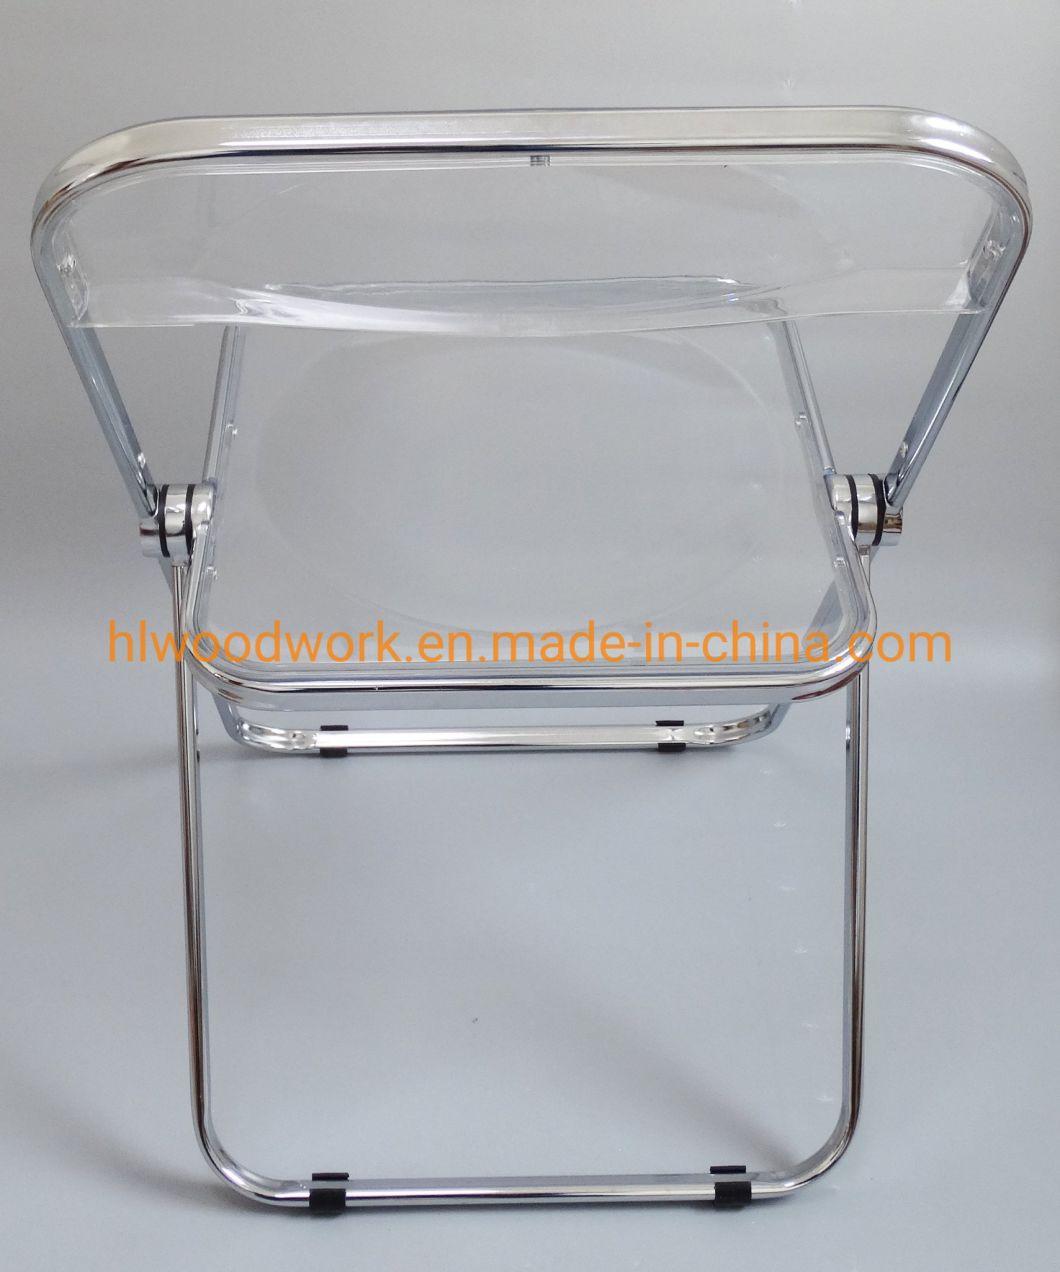 Modern Design Office/Bar/Dining/Leisure/Banquet/Wedding/Meeting Folding Plastic Chair in Chrome Frame Transparent Clear PC Plastic Dining Chair Transparent